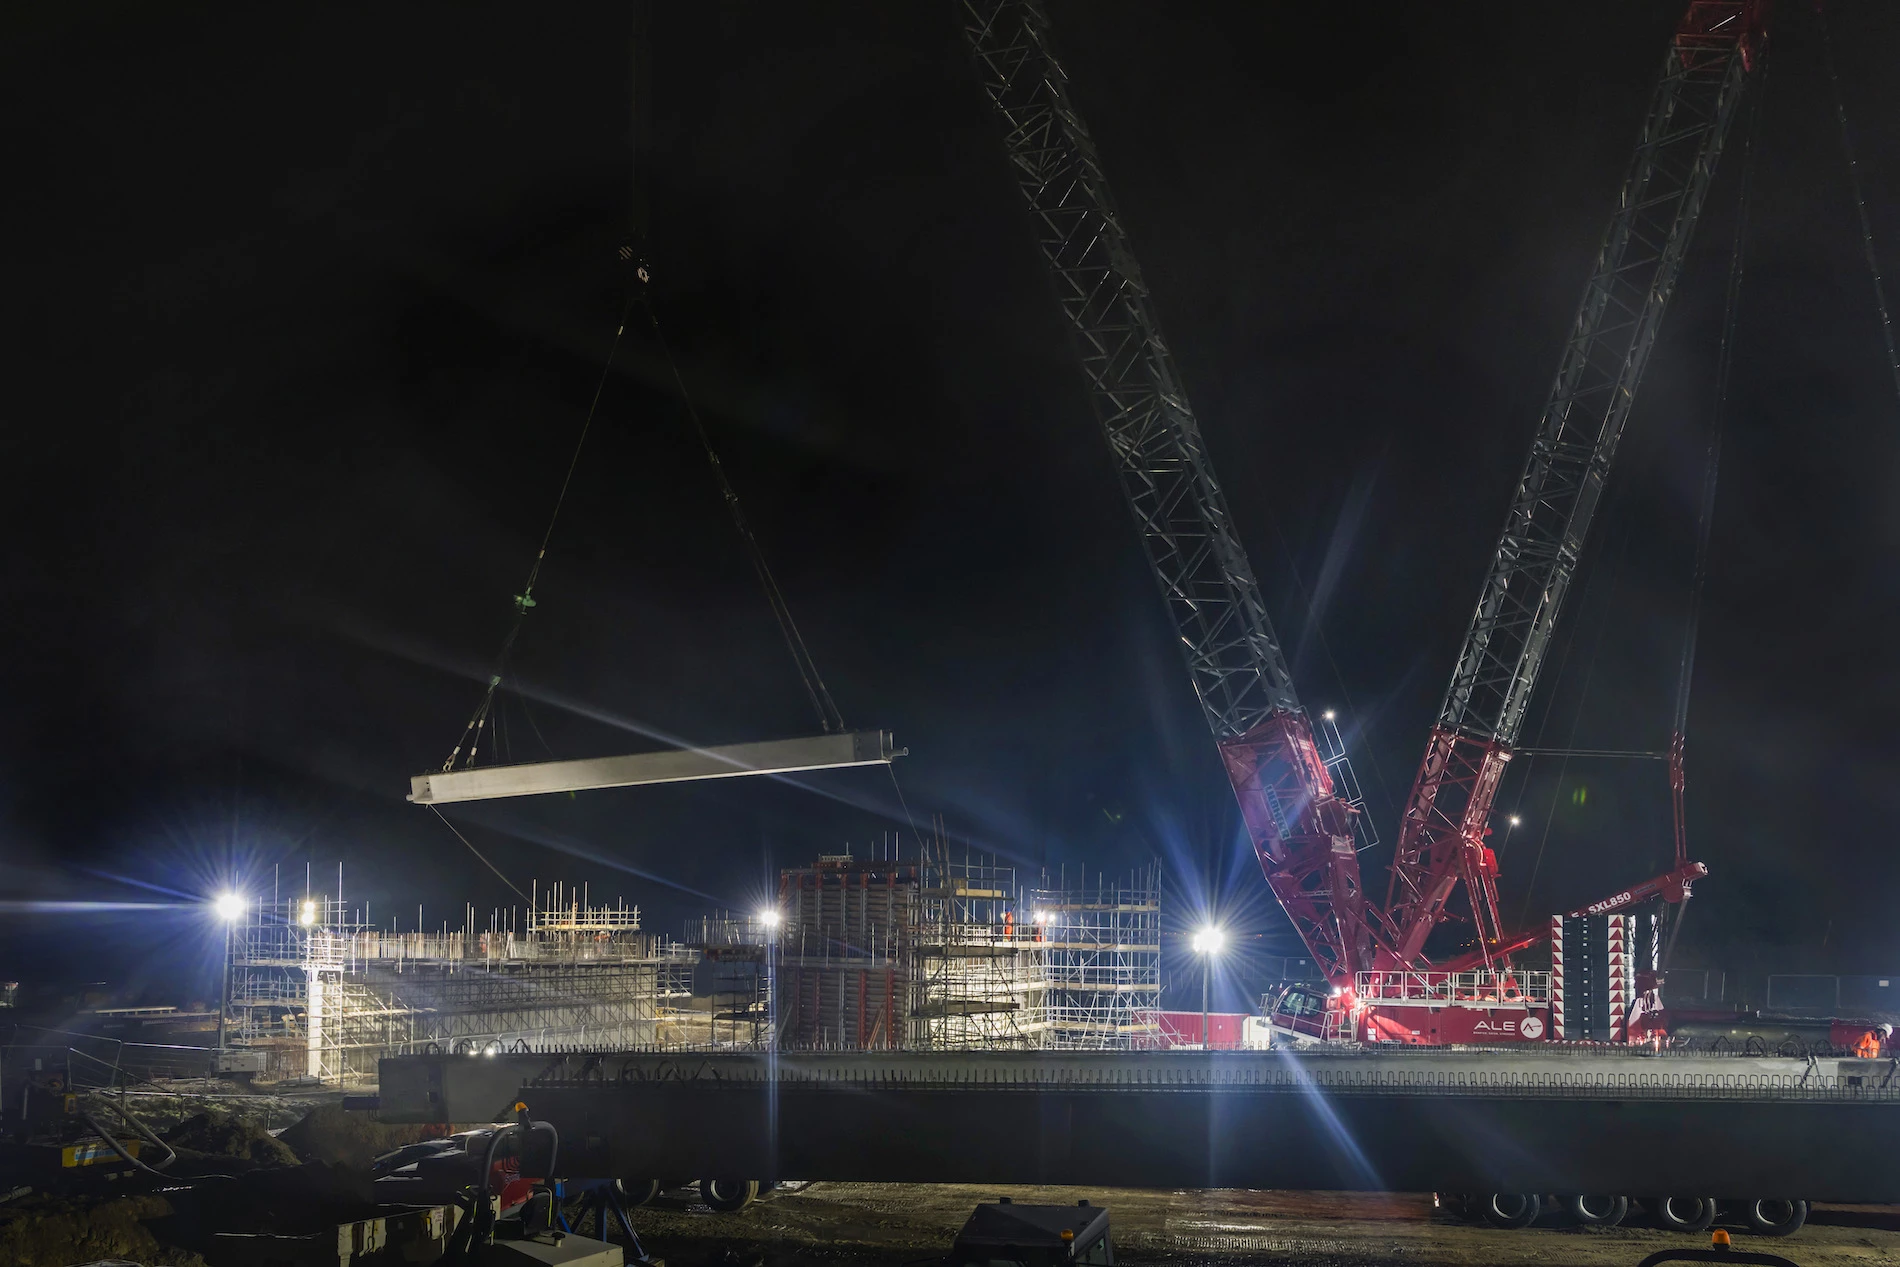 The massive 750 tonne crawler crane has been installed on site. 